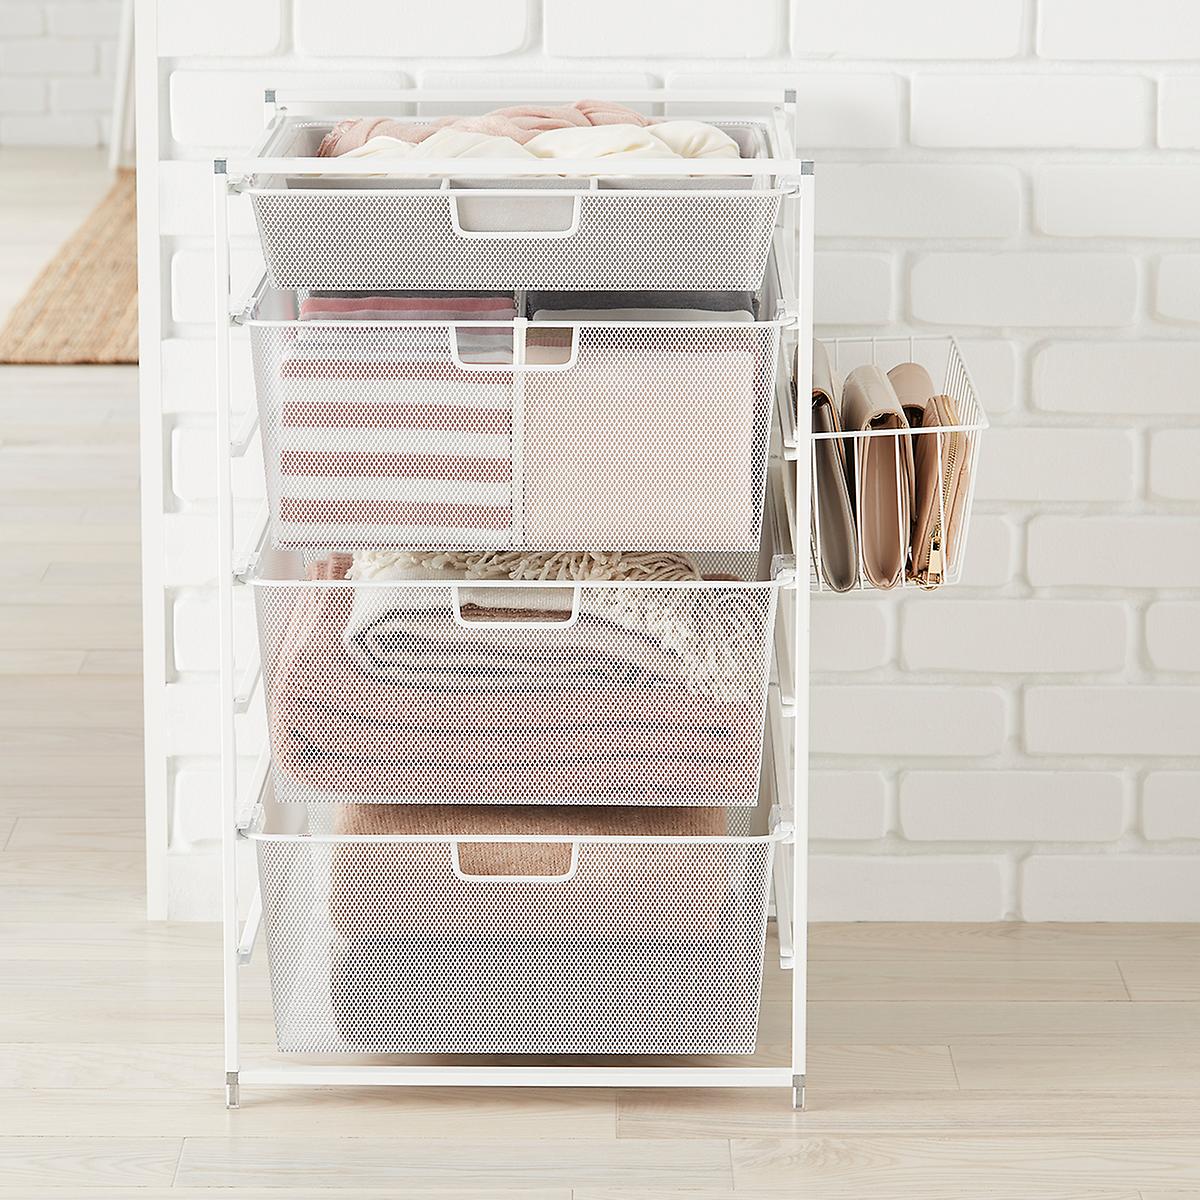 Elfa White Drawers Solution Organizers The Container Store